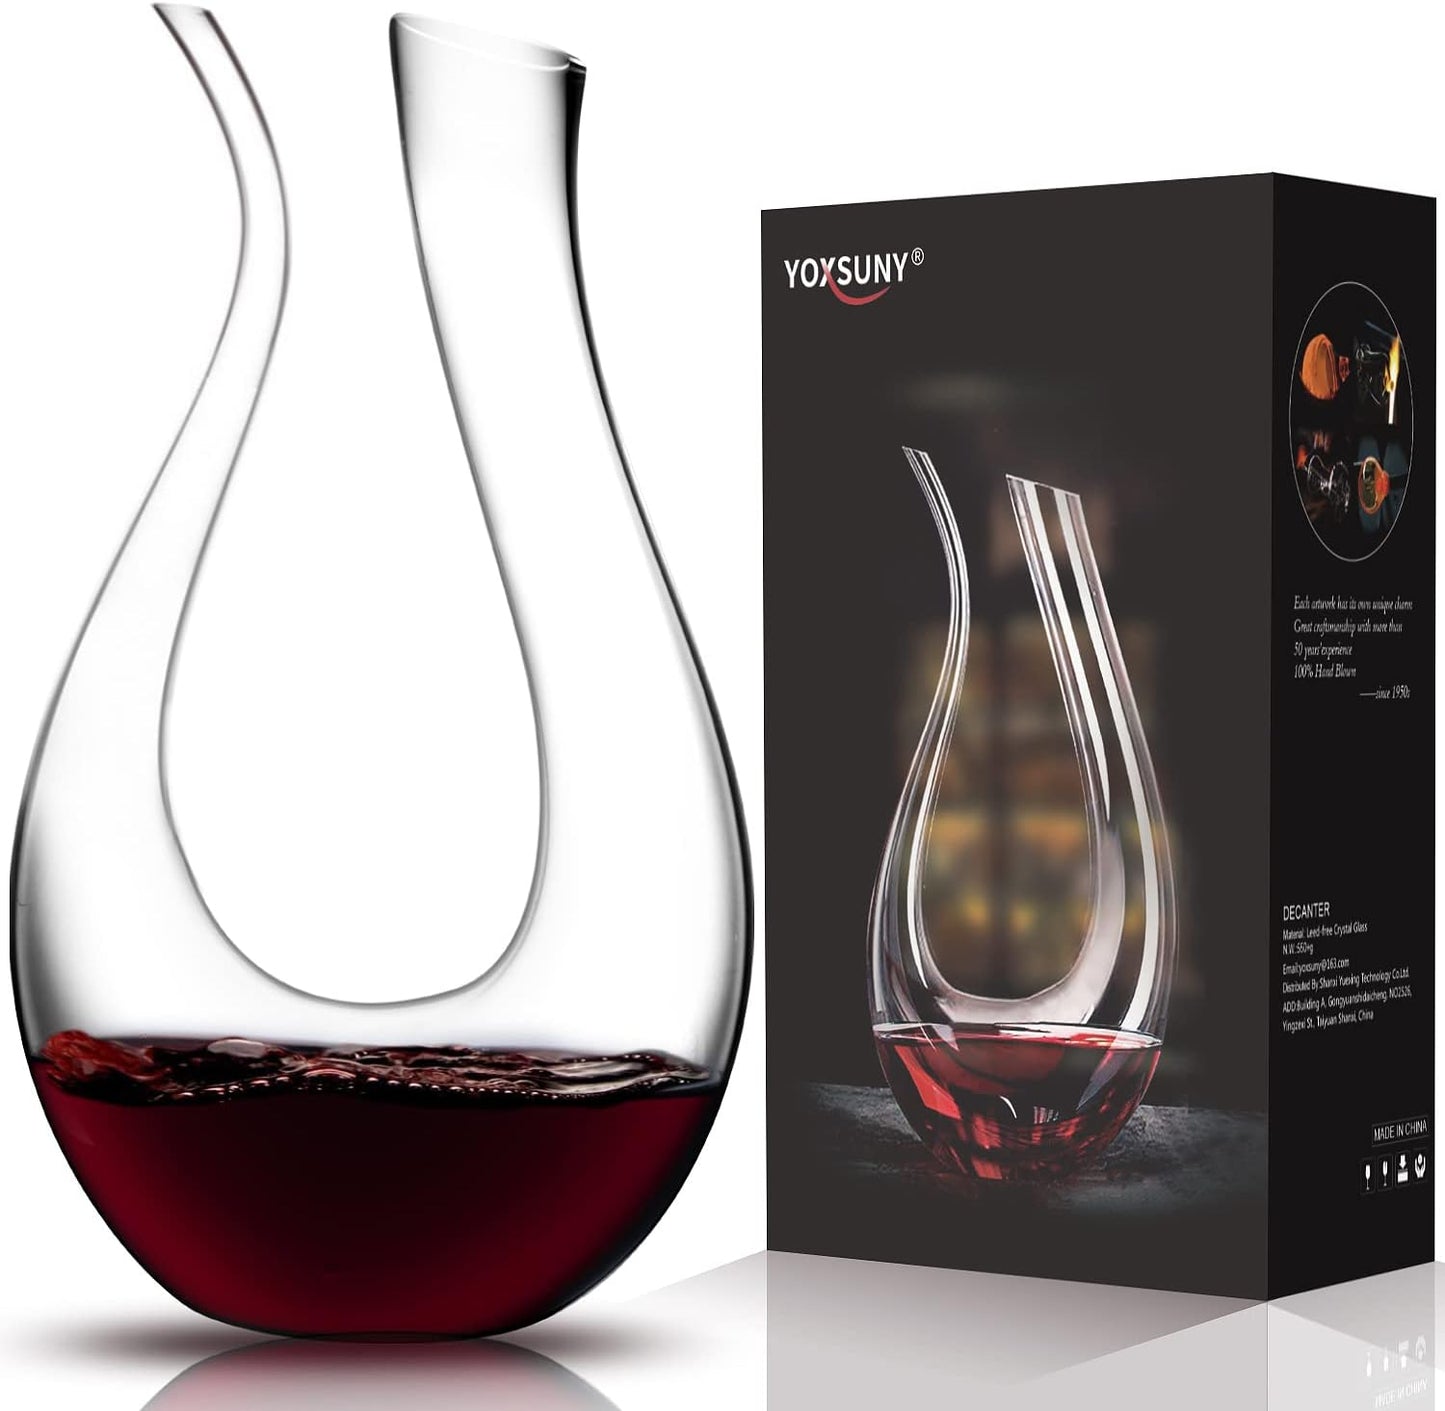 Wine Decanter Swan Looking Back Wine Carafes 100% Lead-Free Crystal Glass Red Wine Decanter Juice Container Wine Decanters and Carafes Nice Gift for Wine Lover(1.5L)